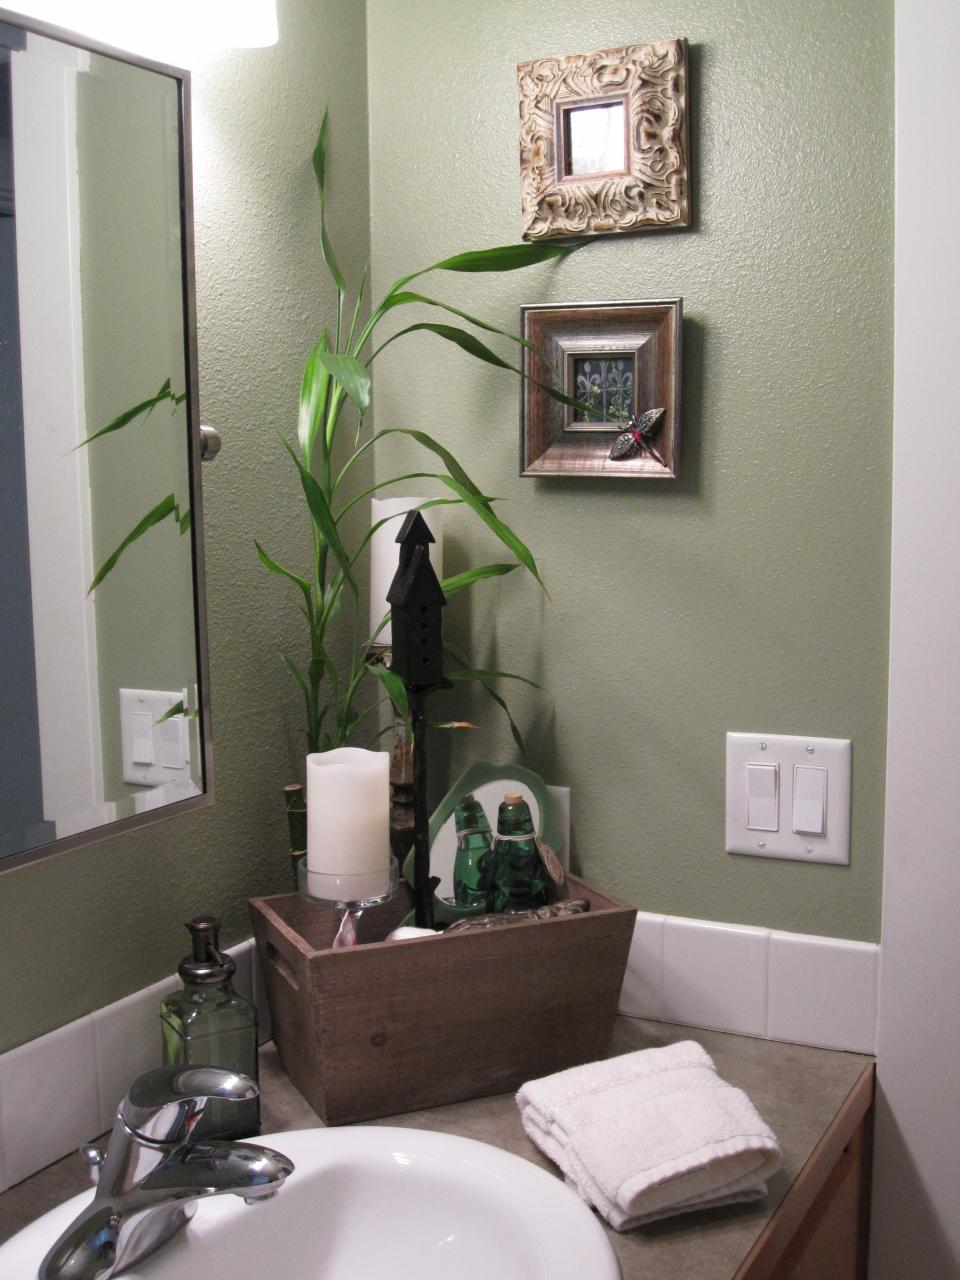 16 Choices of The Best Color For Bathroom Walls Should be DIYHous